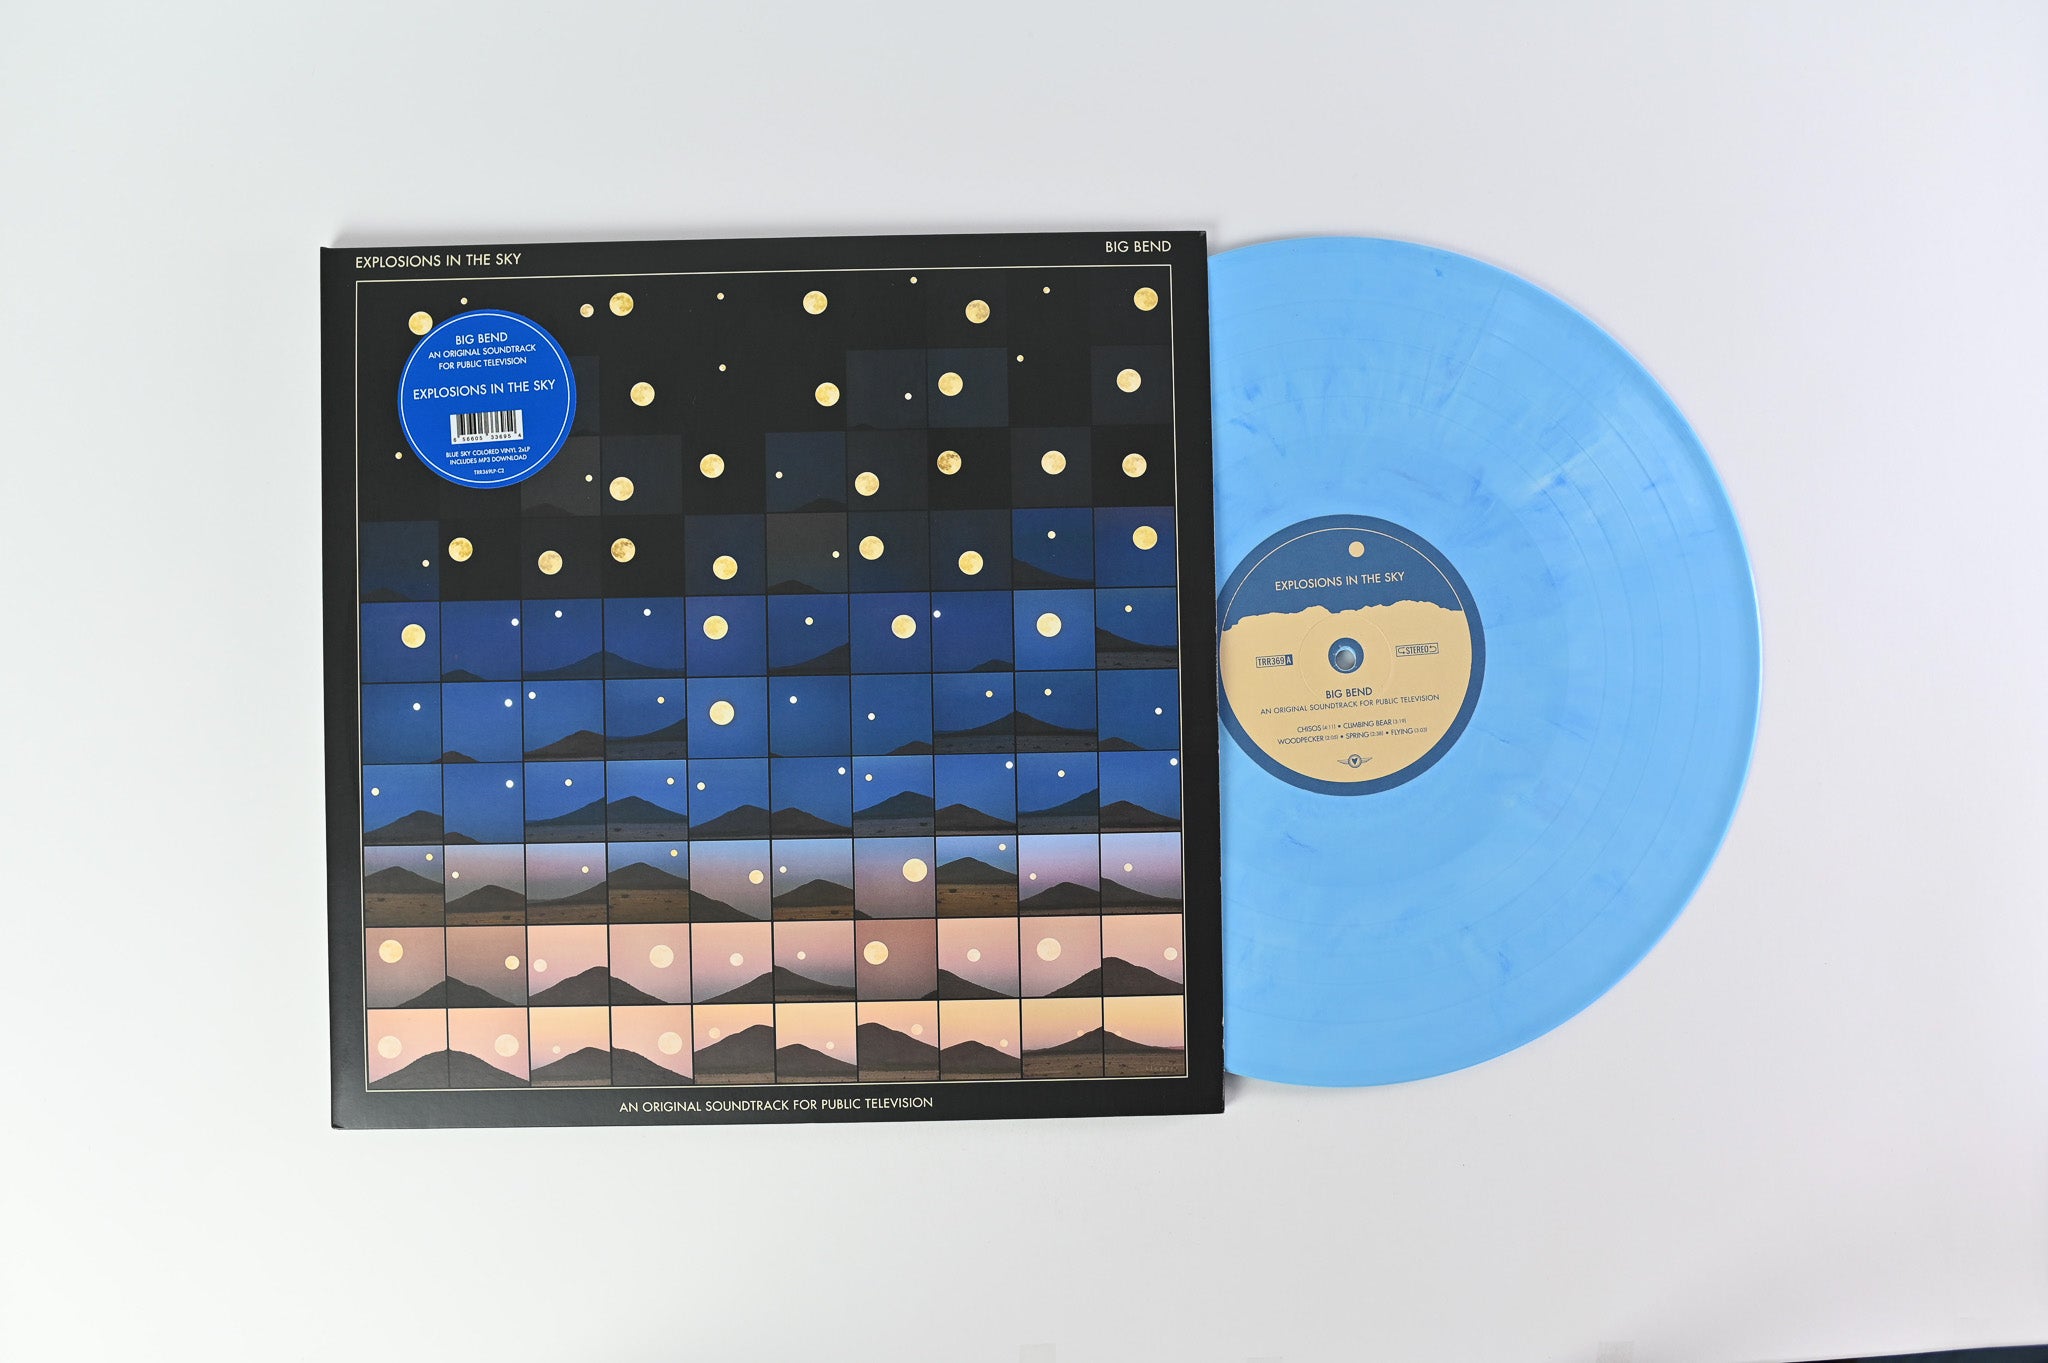 Explosions In The Sky - Big Bend (An Original Soundtrack For Public Television) on Temporary Residence Blue Sky Vinyl